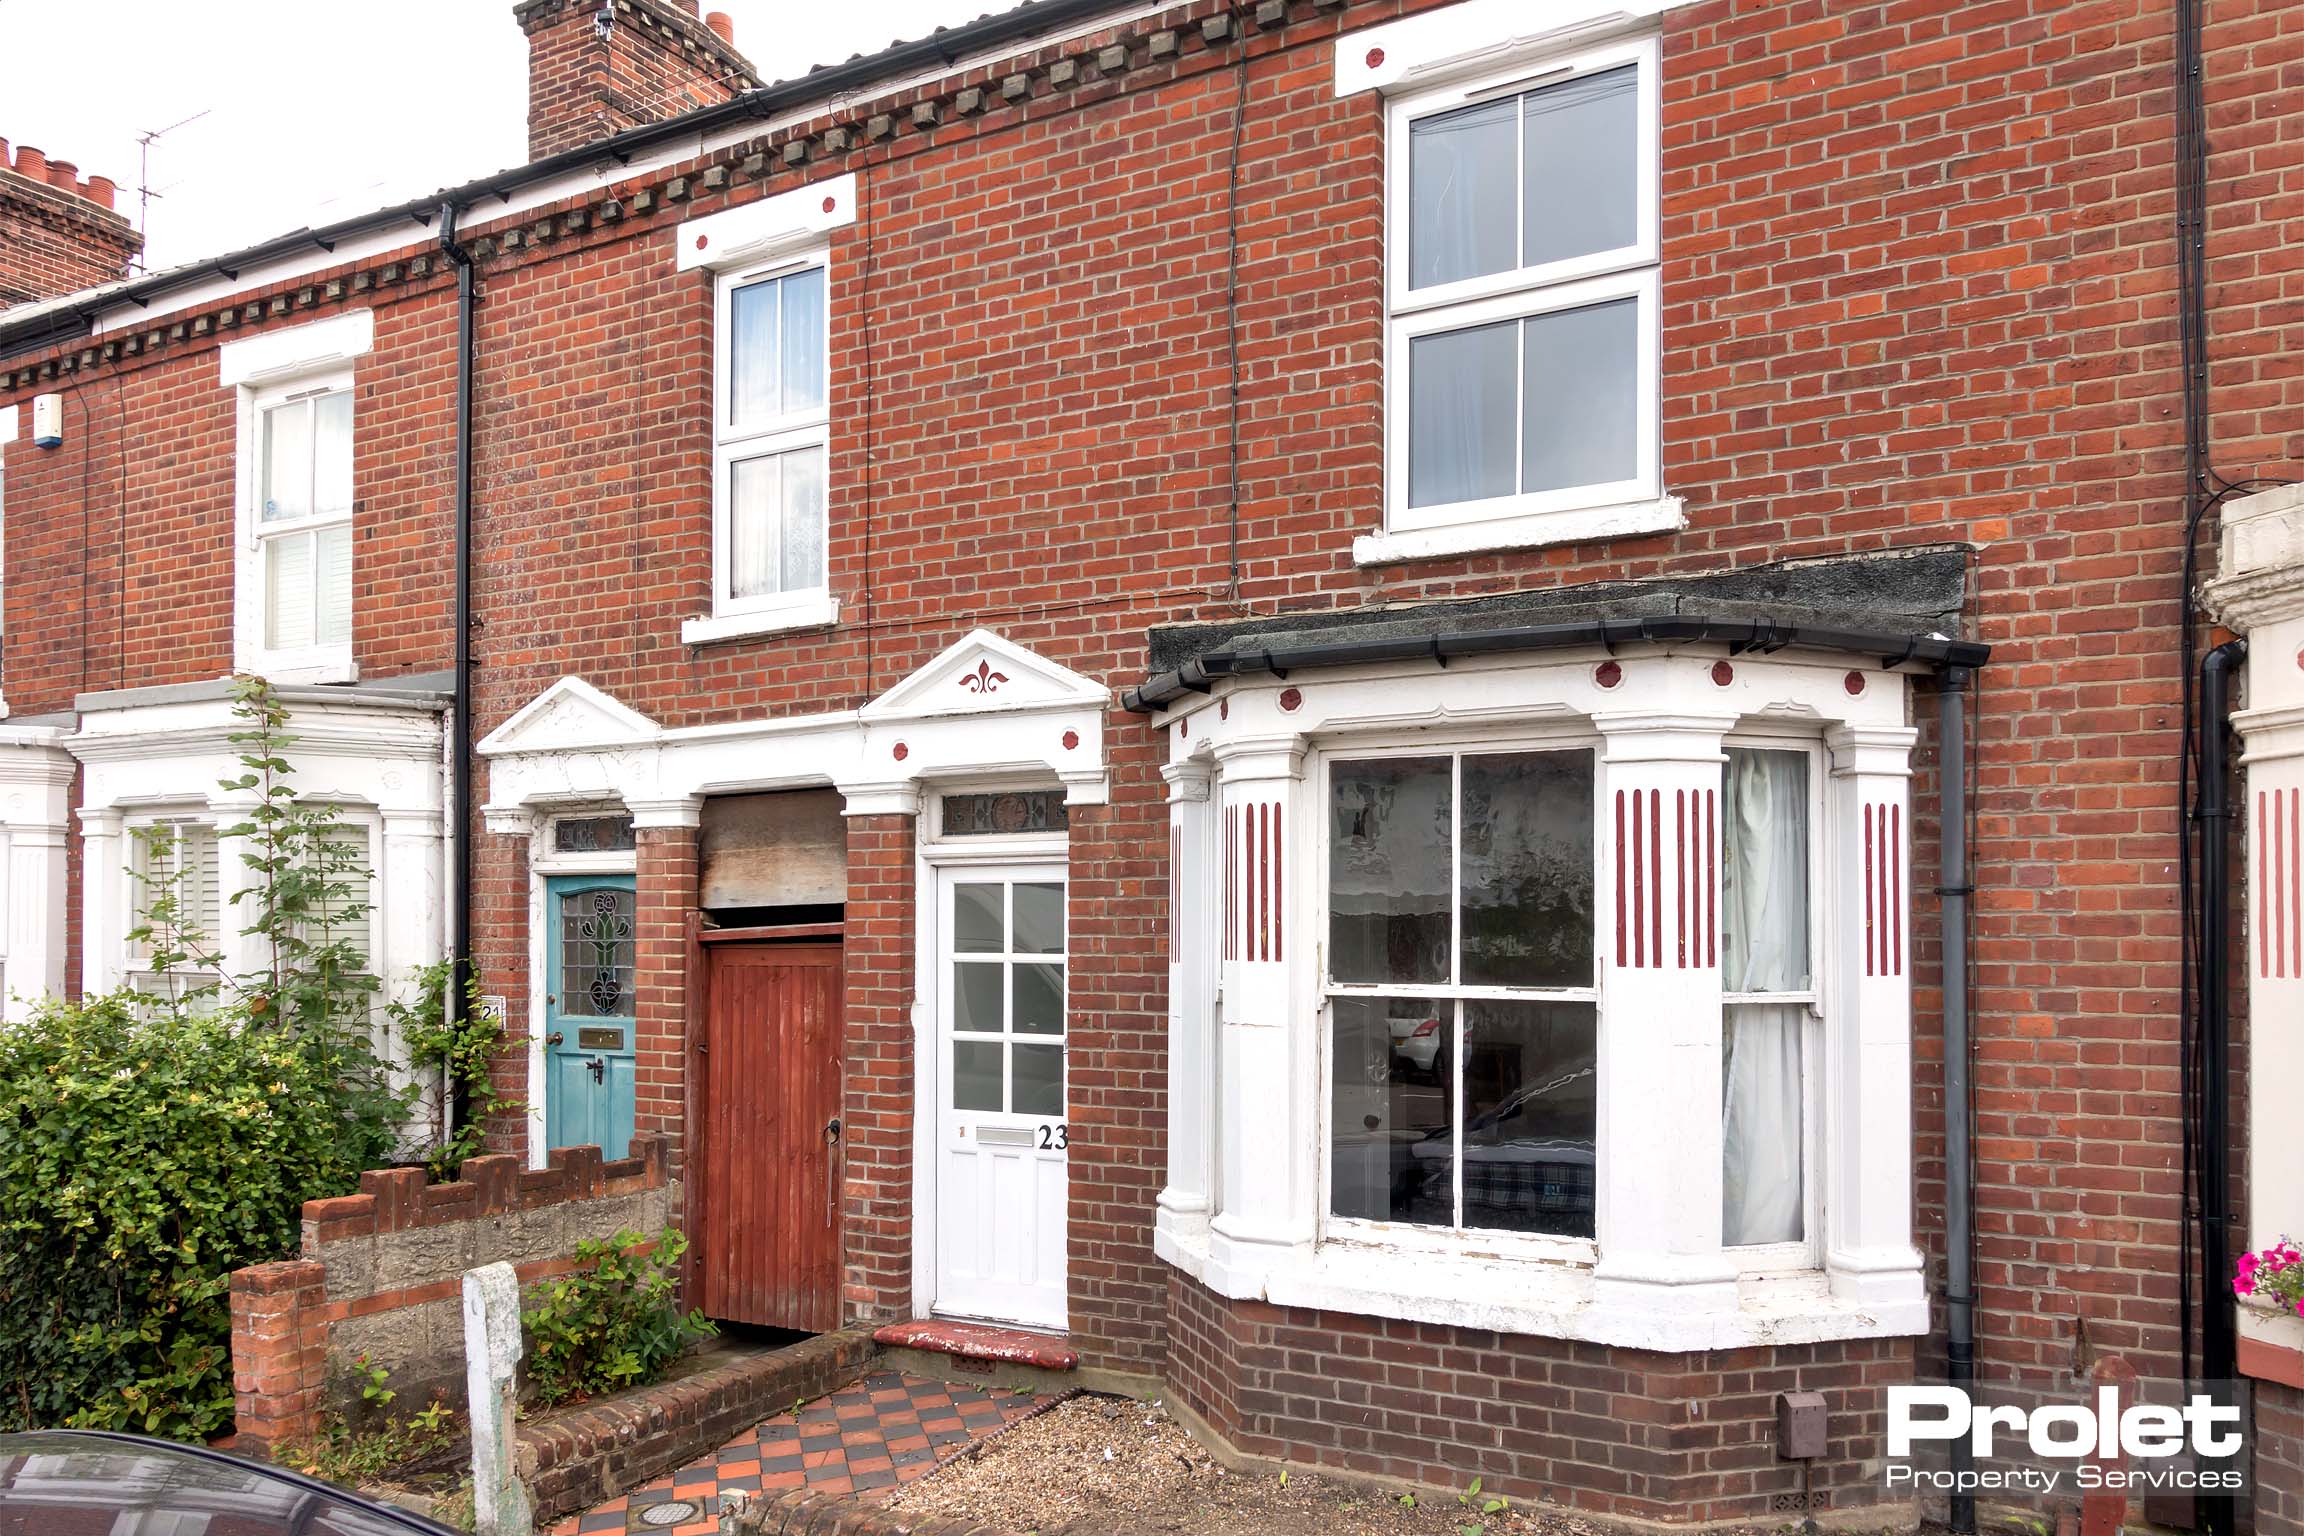 Booking a viewing for Portersfield Road, Norwich NR2 3JT